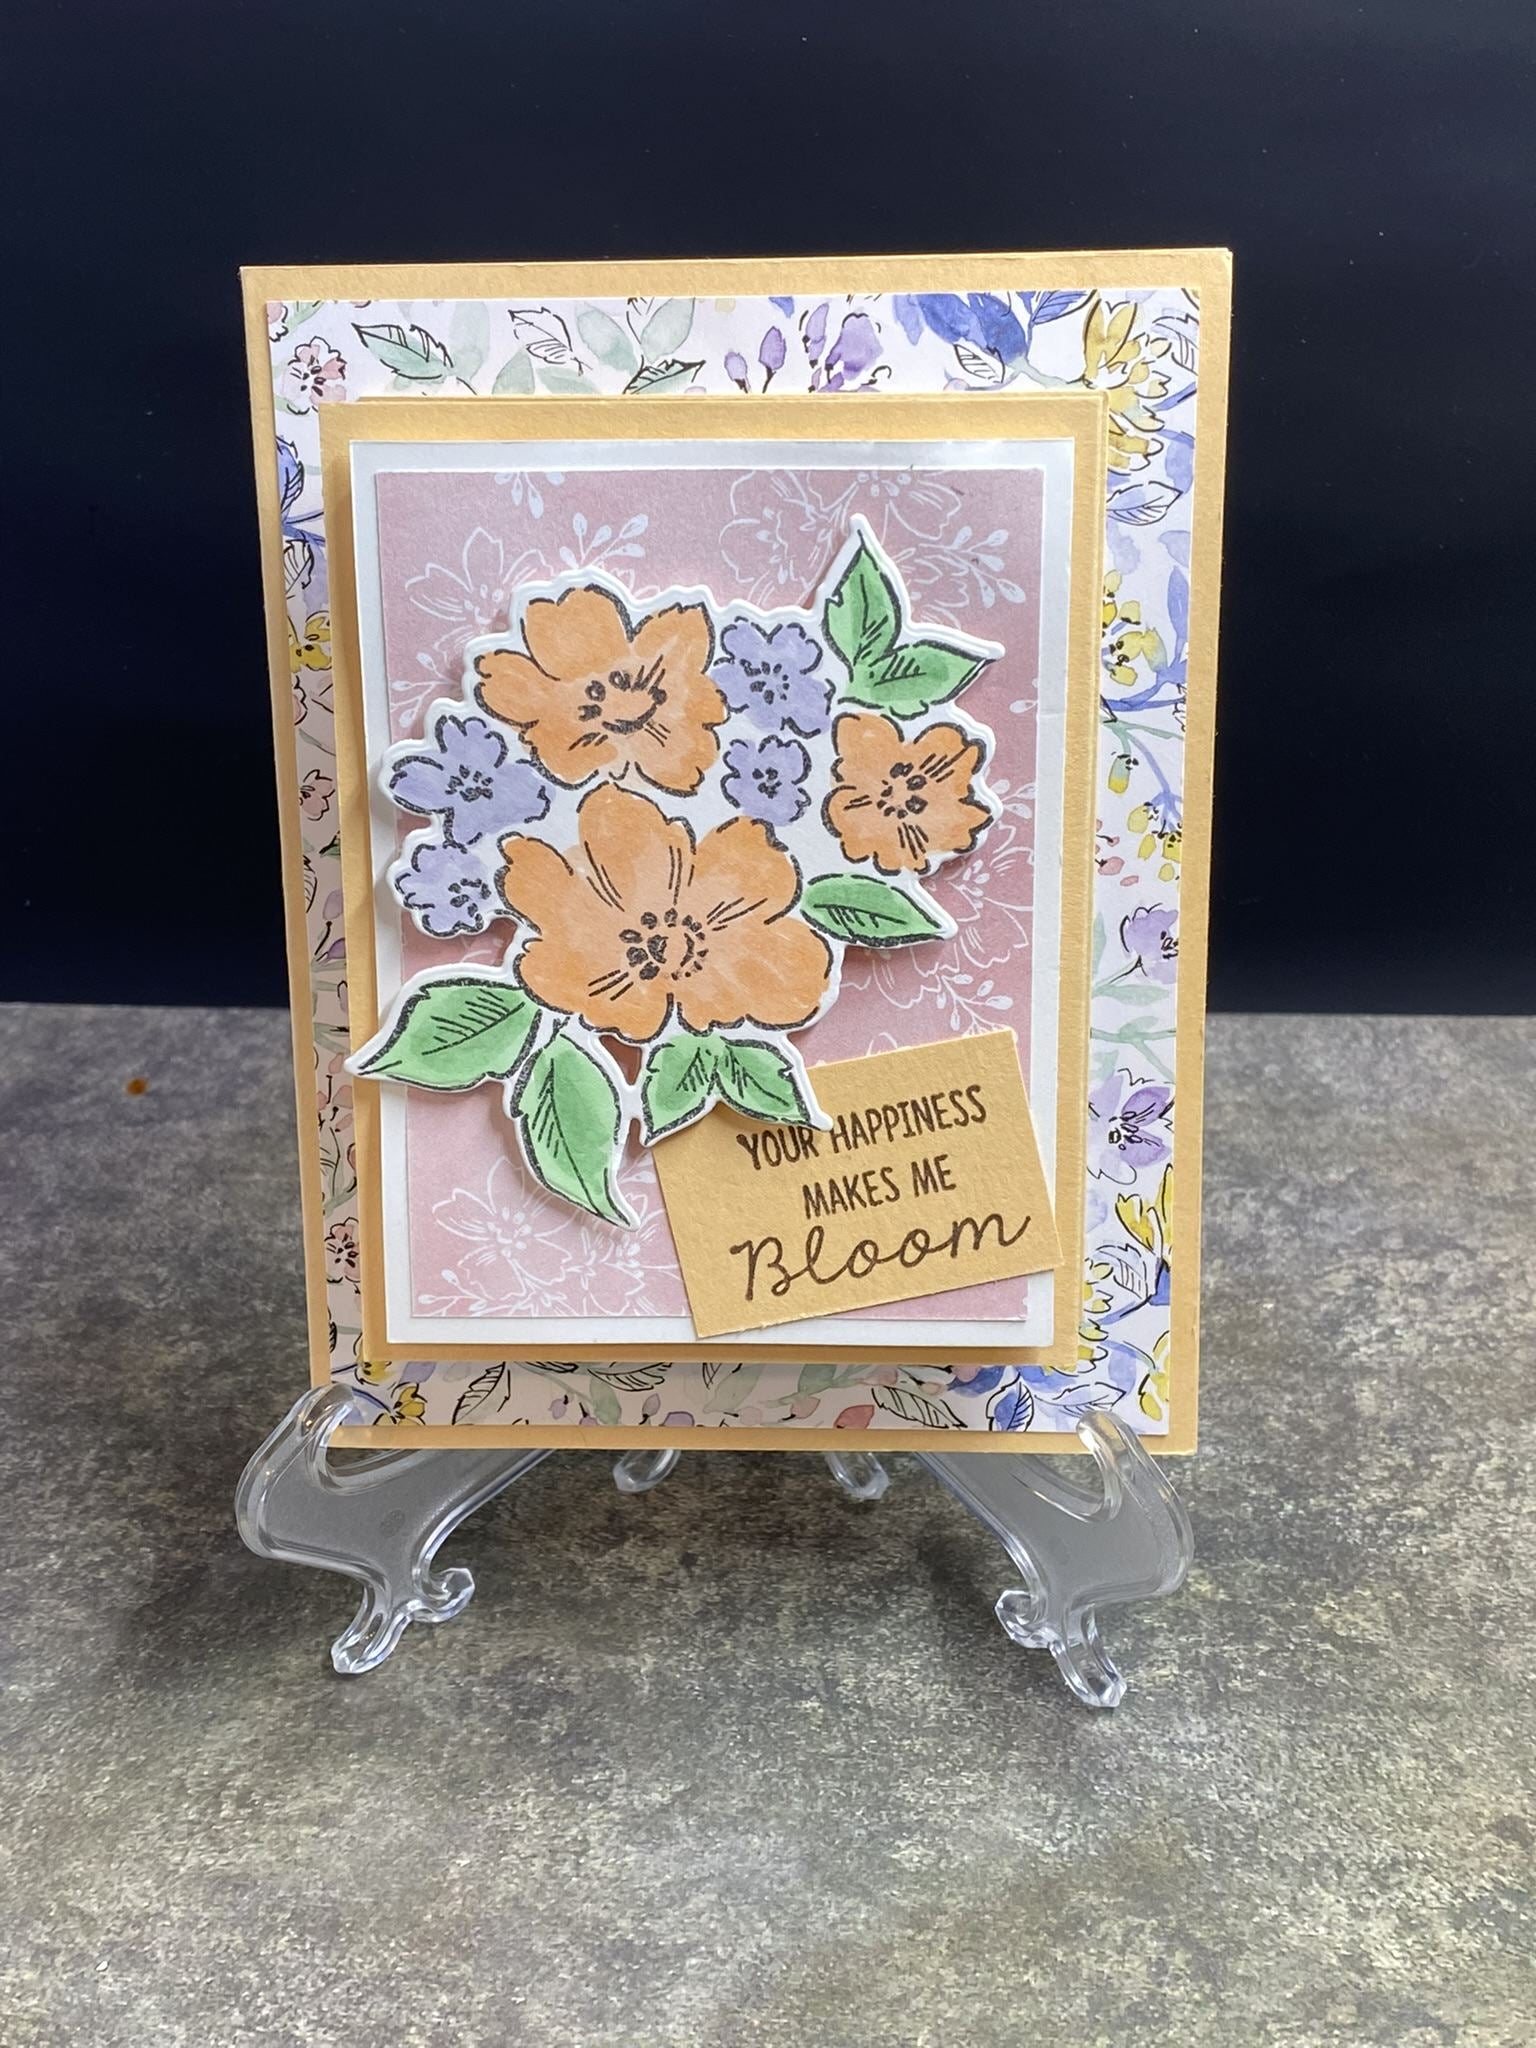 Greeting Card Handmade: Outside Sentiment "Your Happiness Makes Me Bloom" Inside Greeting "Spread Love Everywhere You Go Let No One Ever Come To You Without Leaving Happier - Mother Teresa" Floral Fancy Fold Card - CM Design Studios